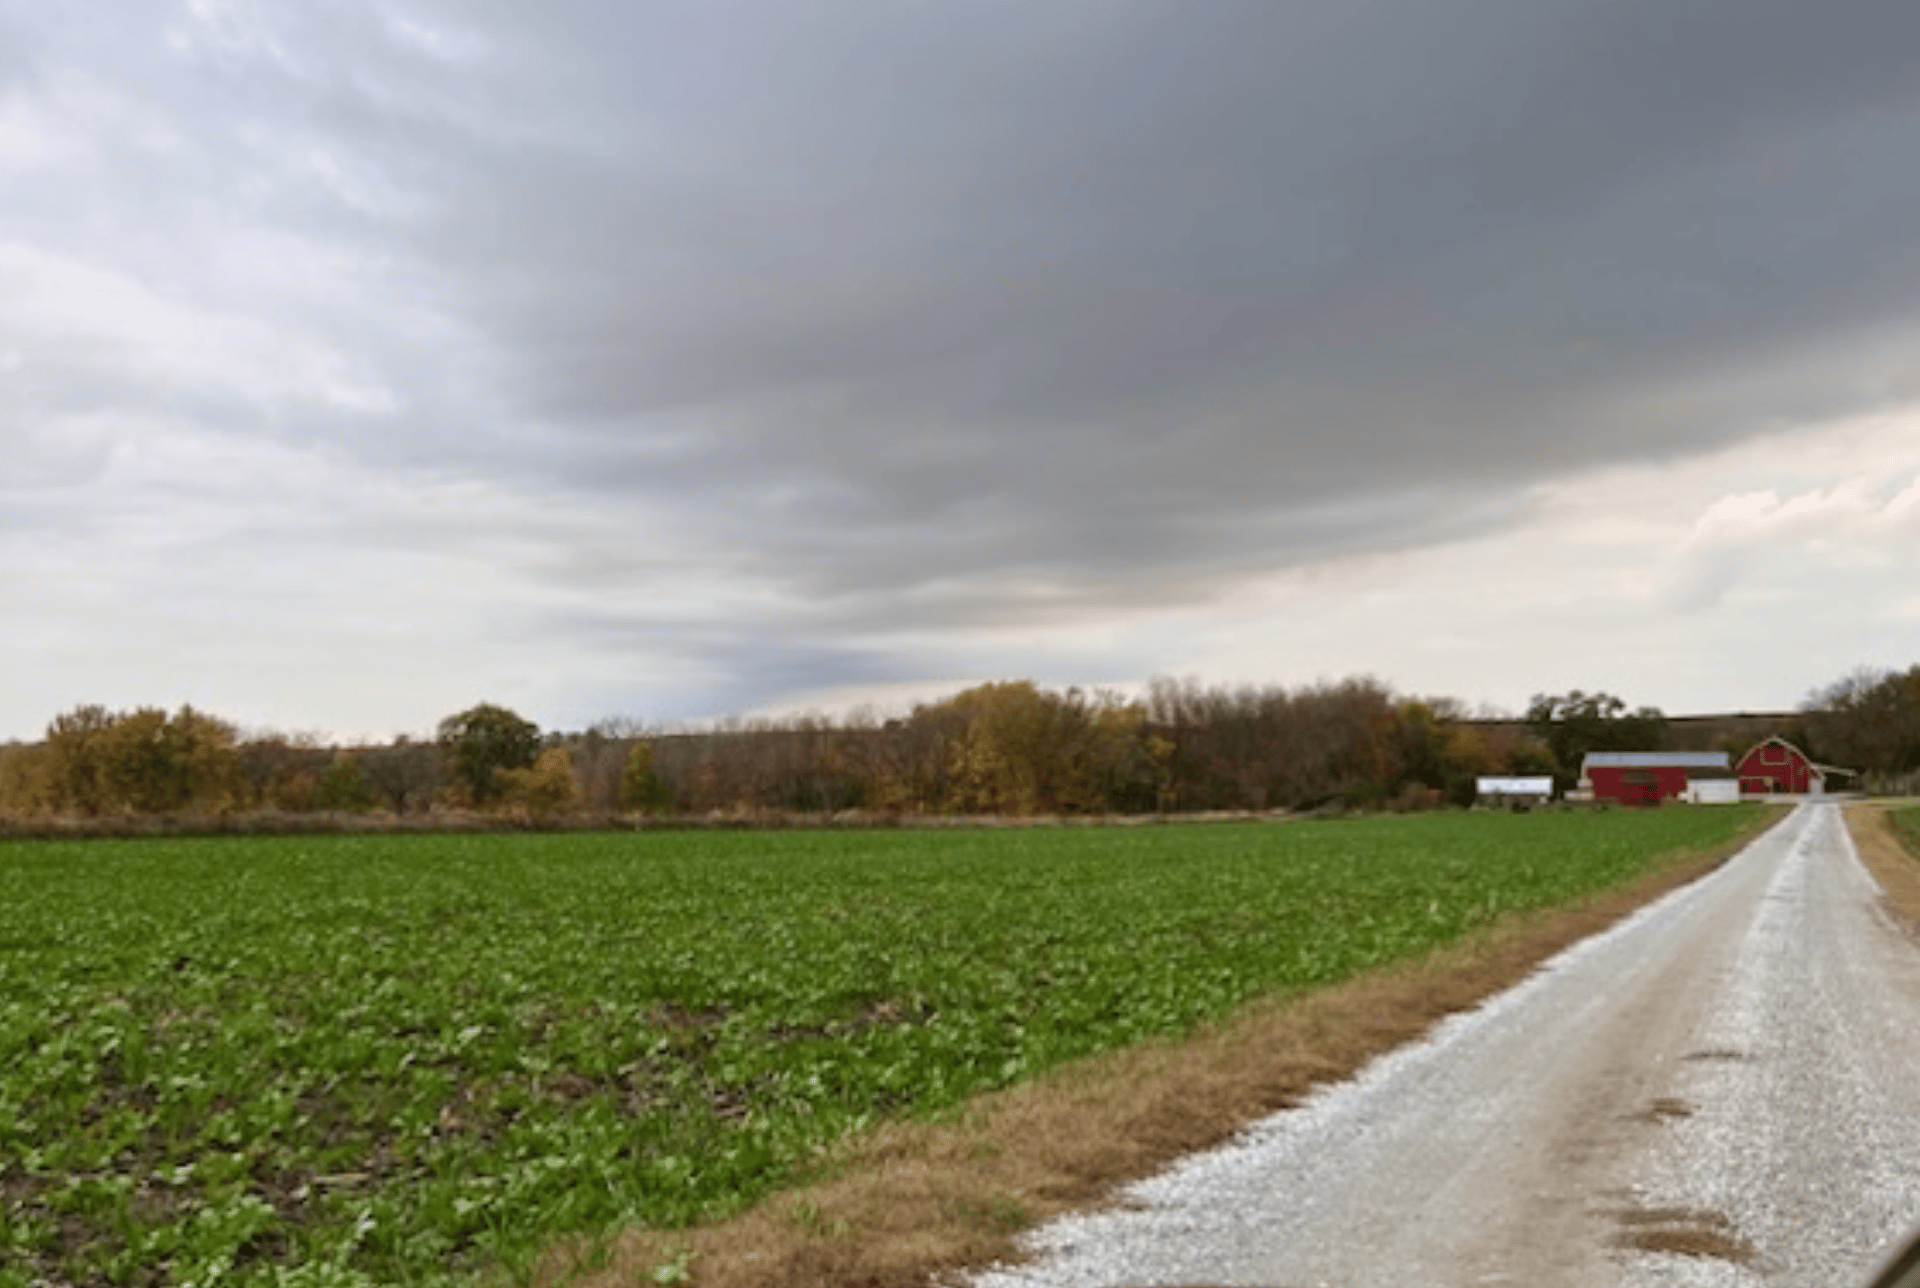 long gravel driveway leading to a red barn on a cloudy day with a large green field on the left